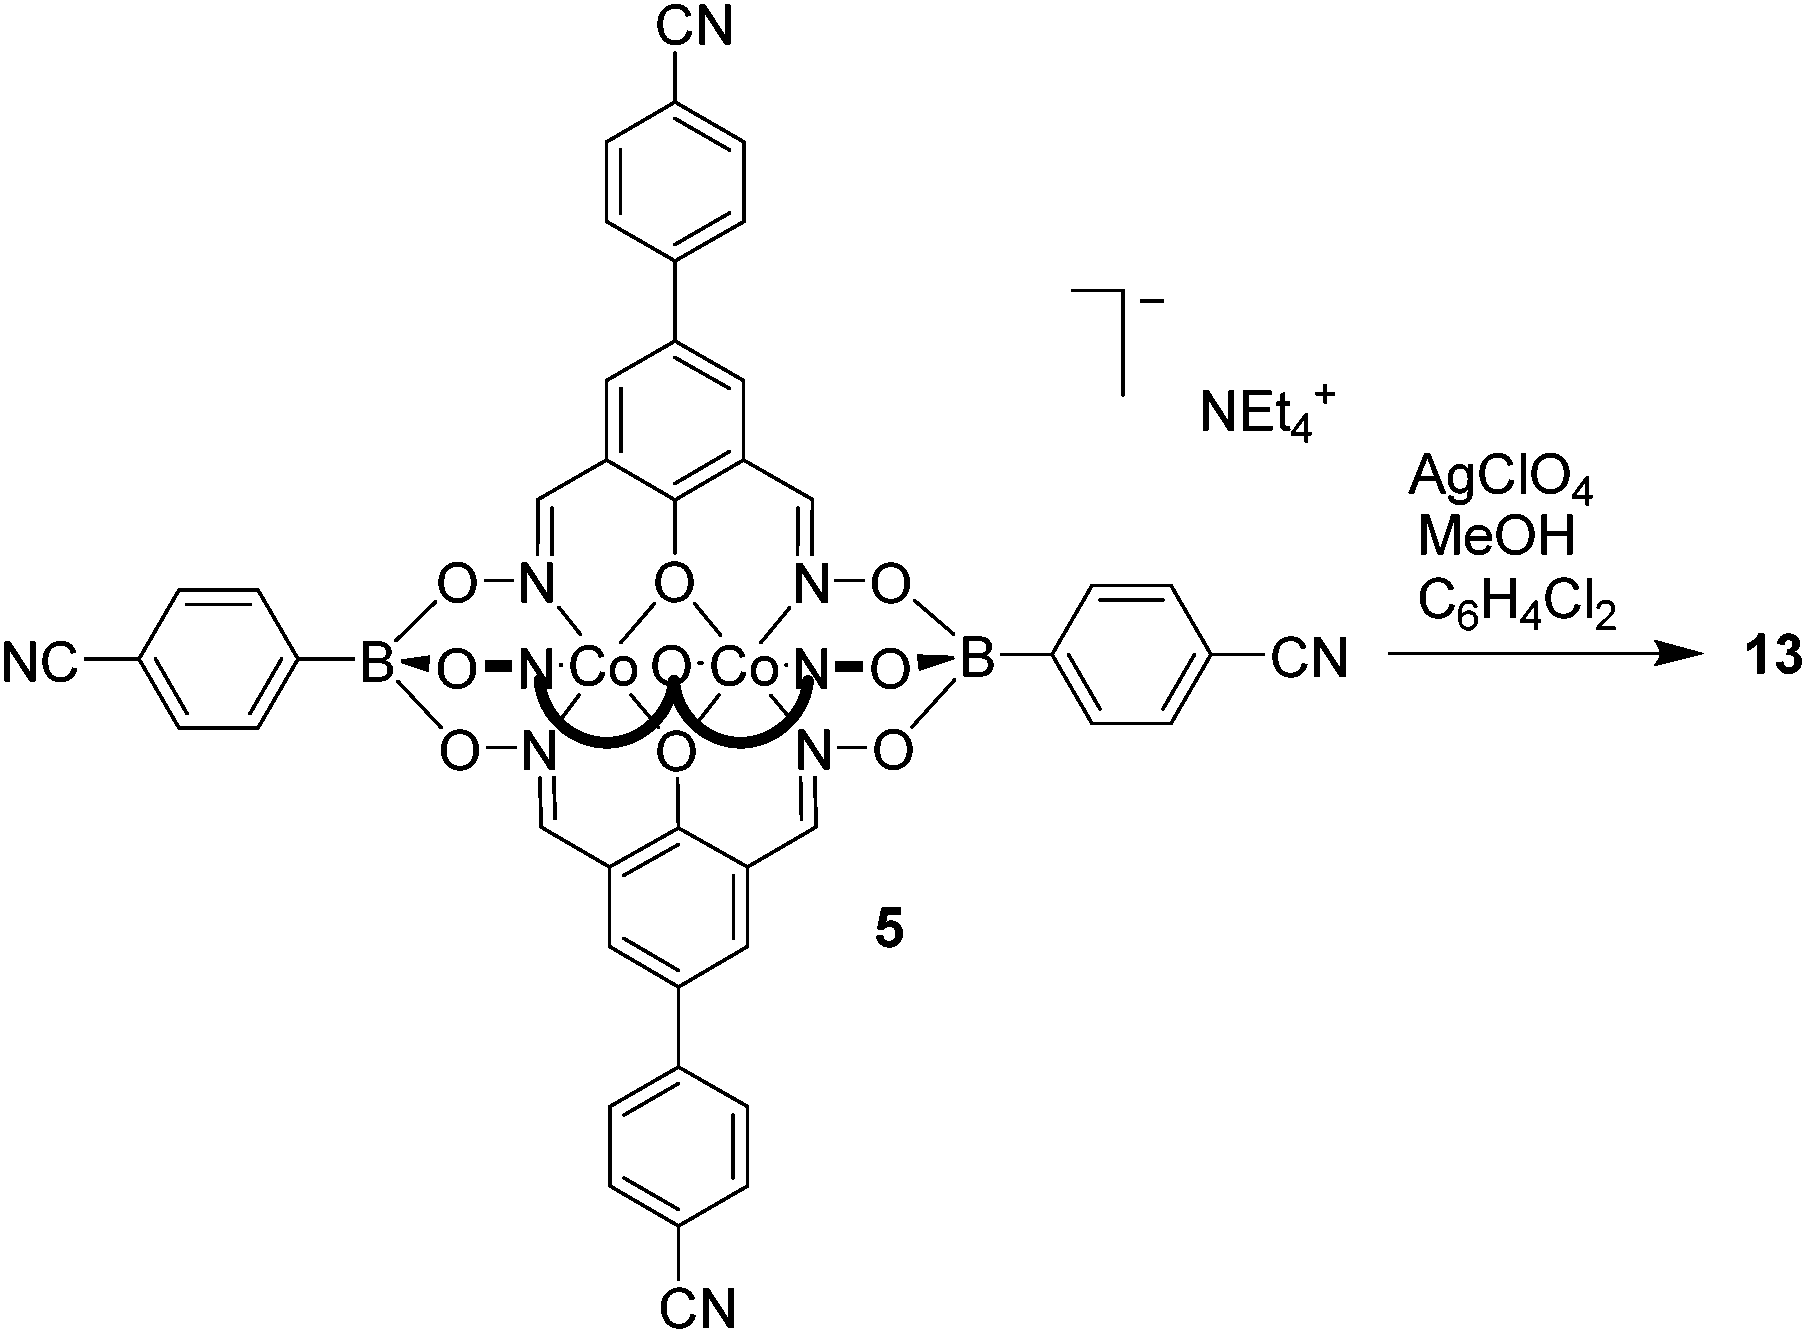 dinuclear clathrochelate complexes with pendent cyan